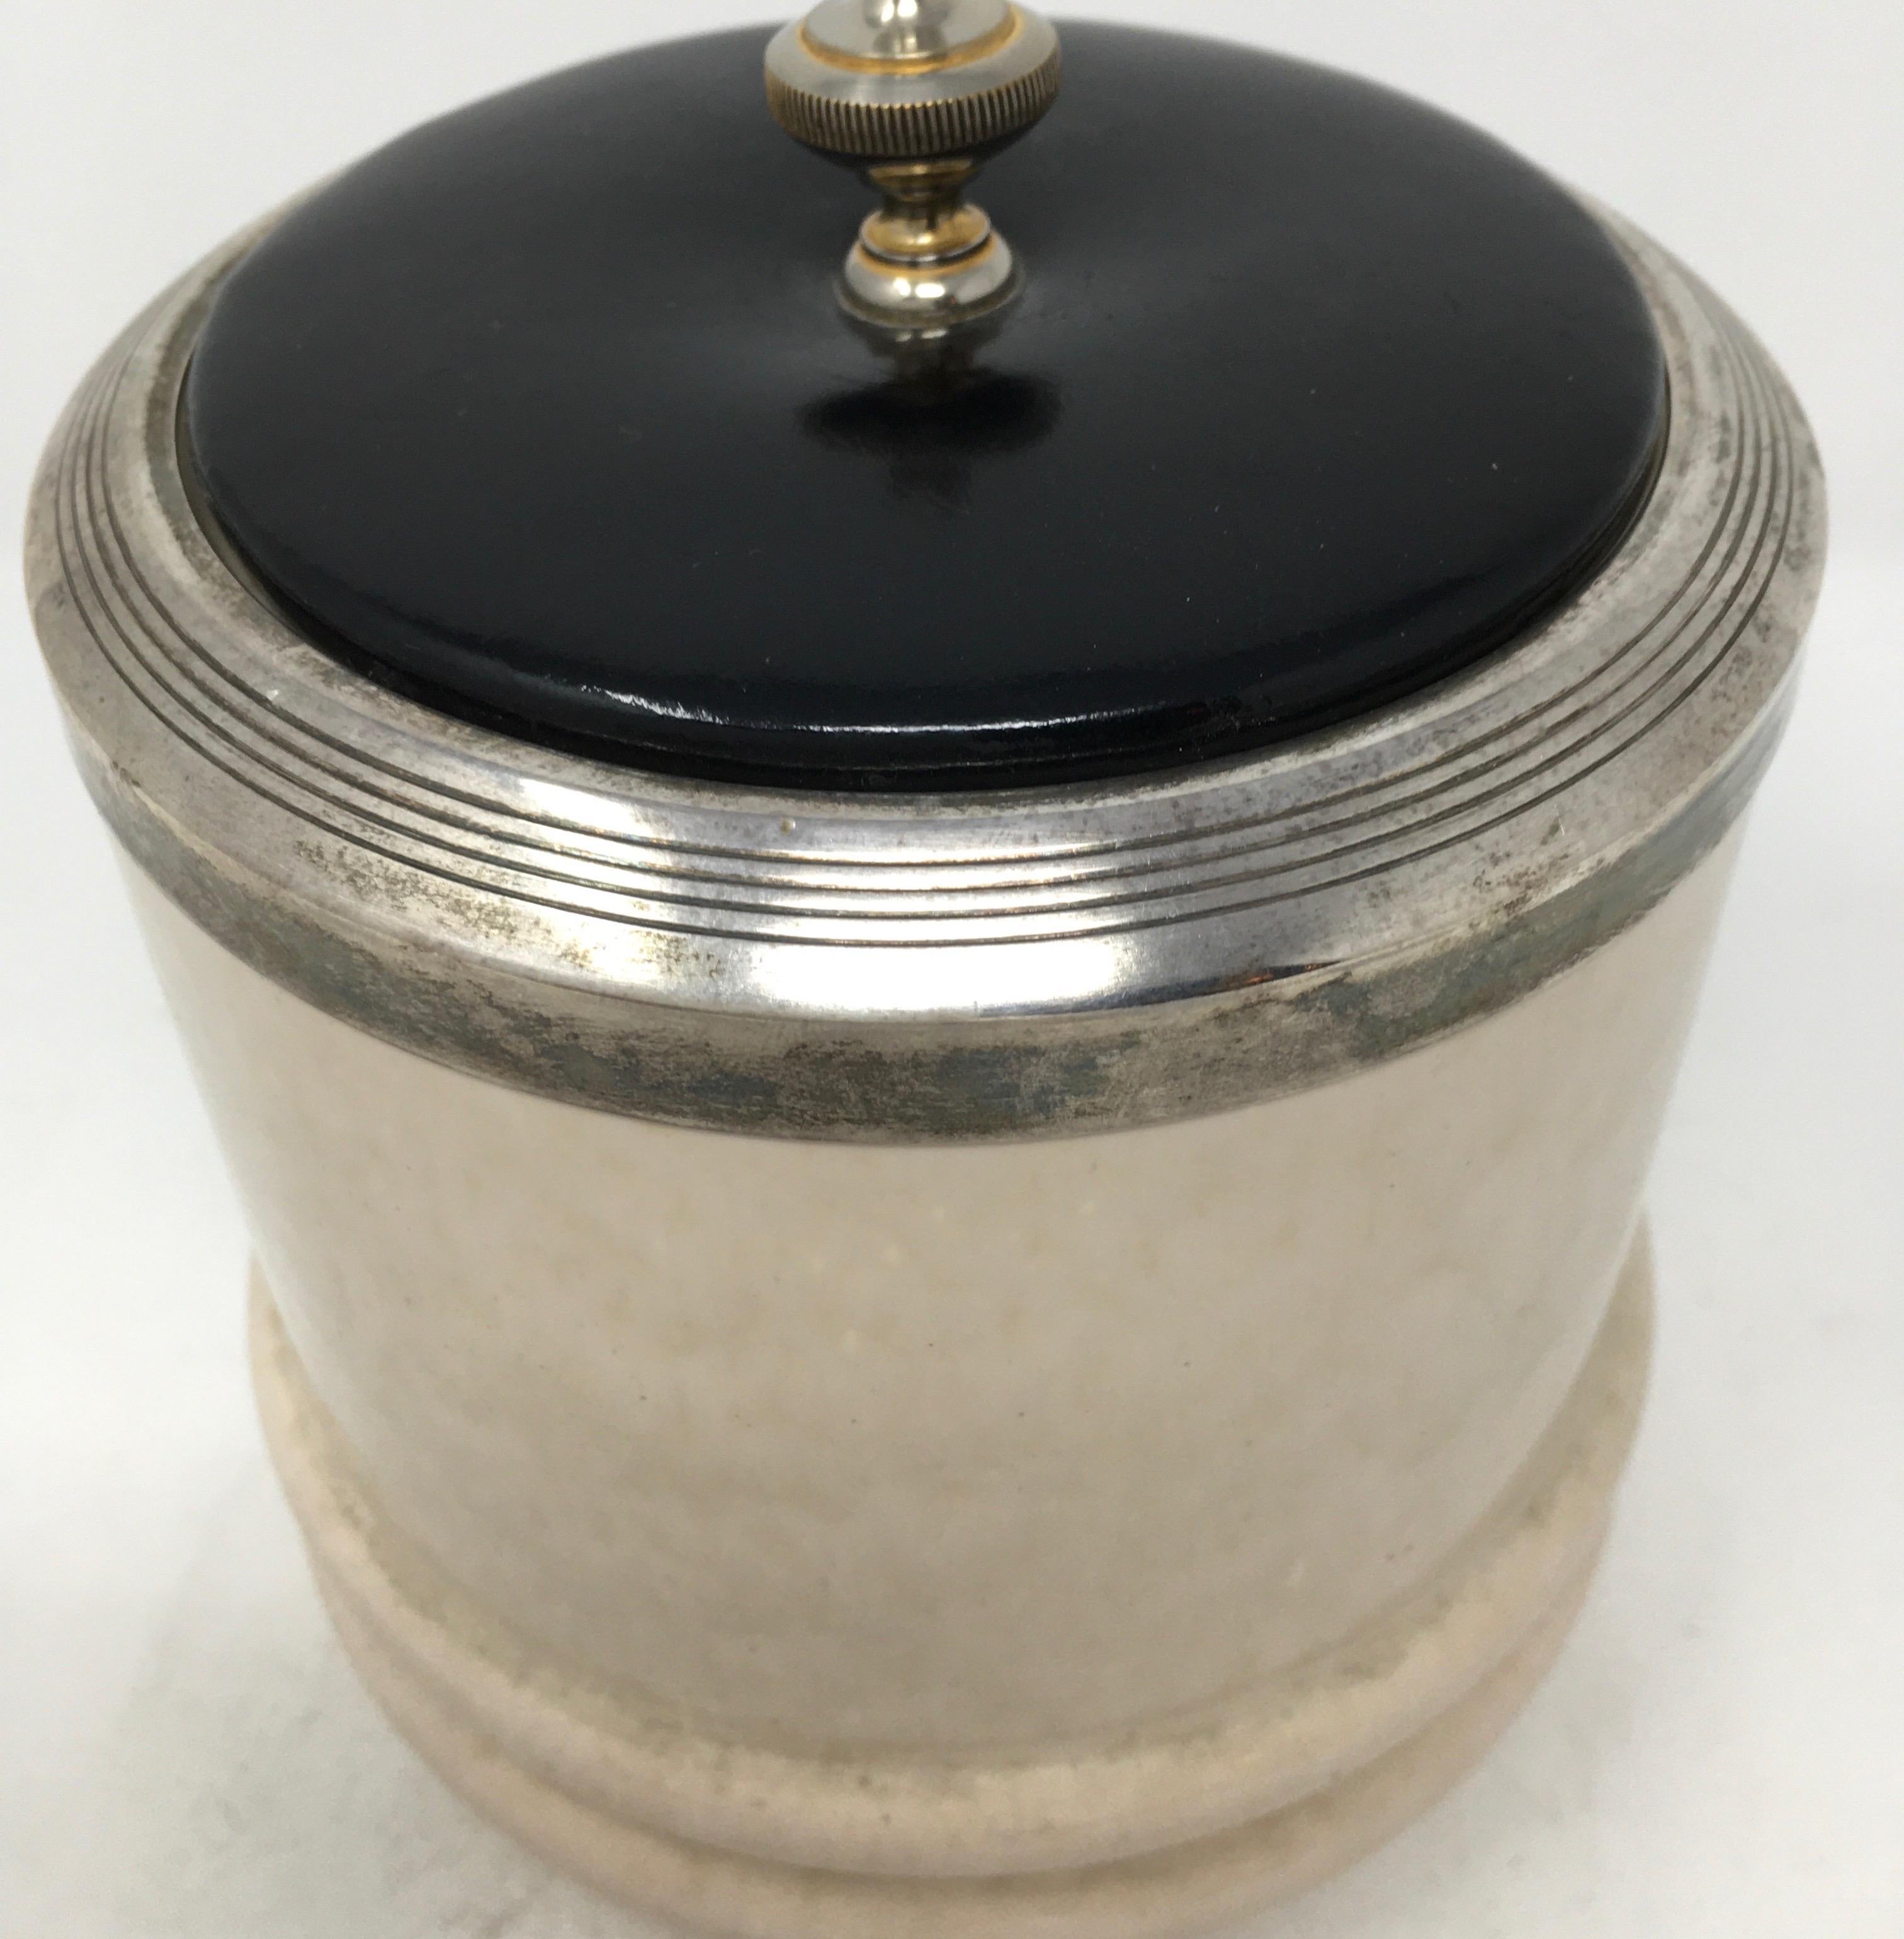 This handsome ceramic tobacco canister has a silver plated rim band and finial. The lid is of wood and has a cork liner.